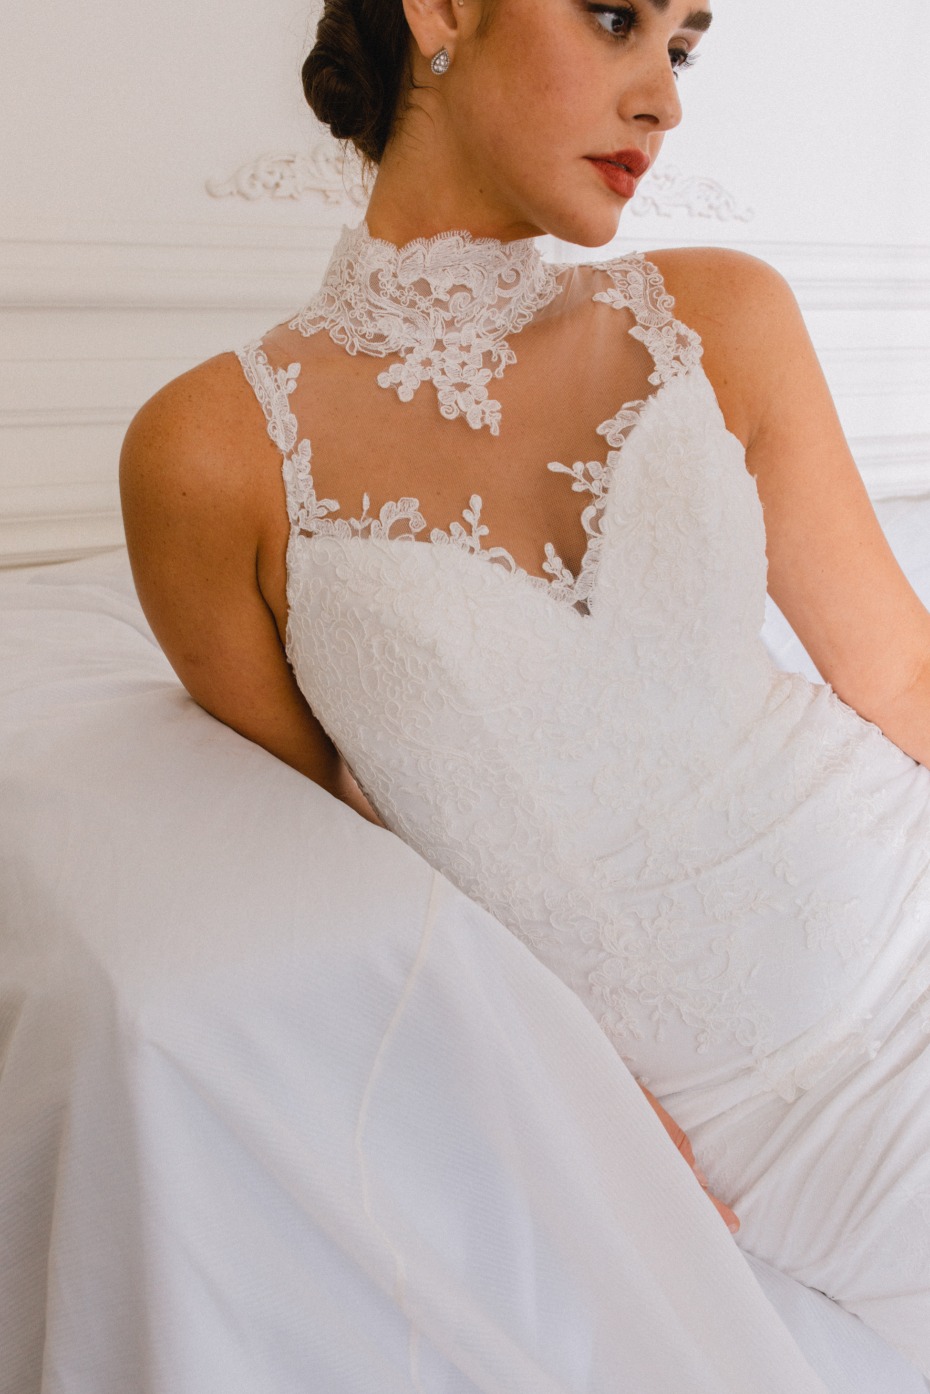 7 Tips From Afarose to Guarantee Shopping for Your Wedding Dress Online Is Successful